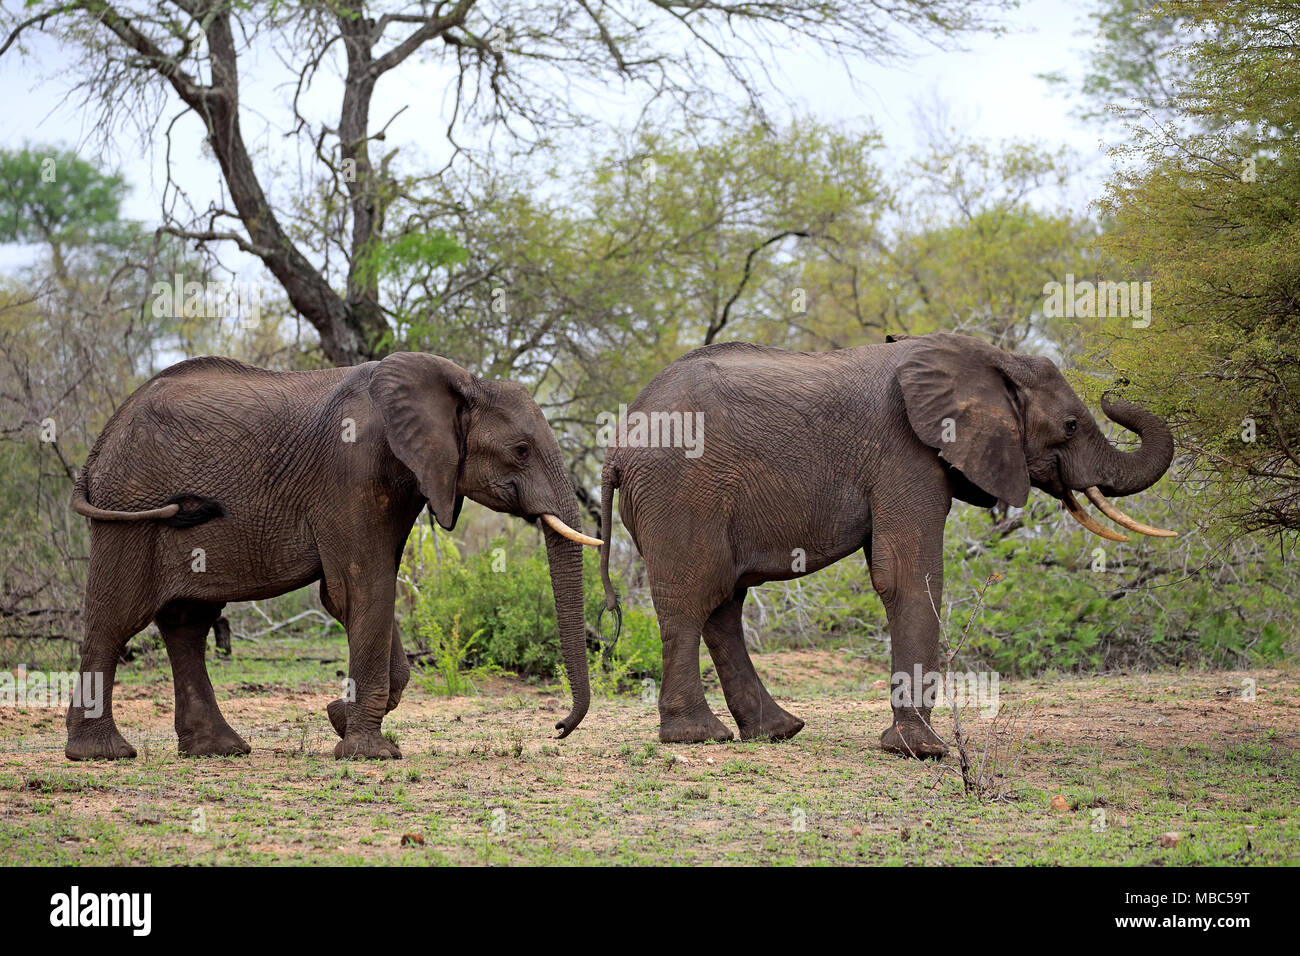 African elephants (Loxodonta africana), two animals in a row, Kruger National Park, South Africa Stock Photo